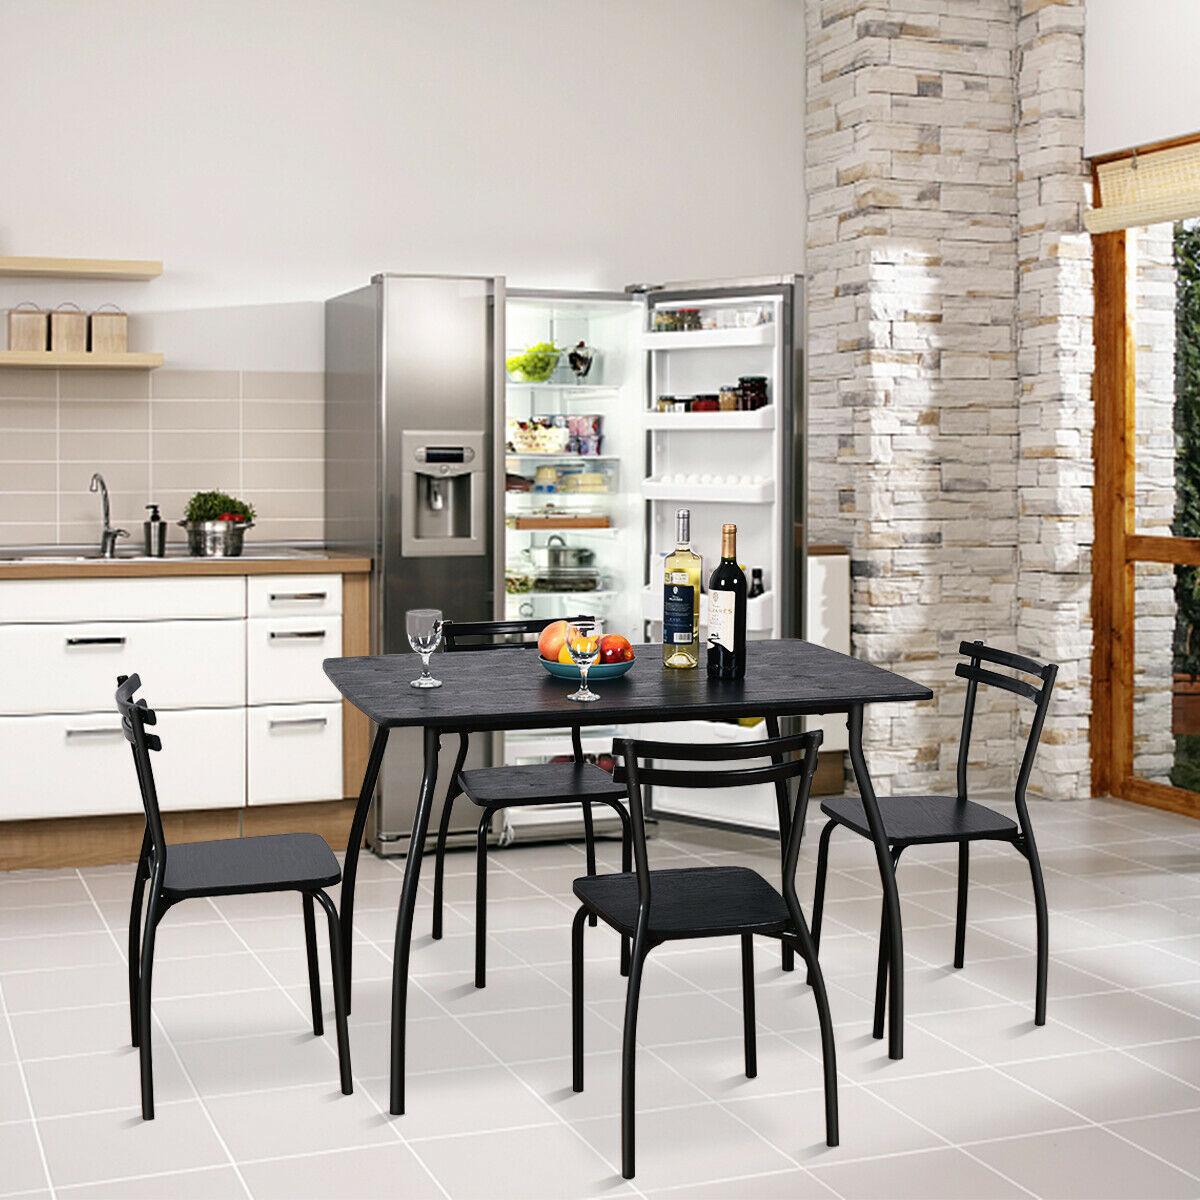 5 Piece Dining Set Table And 4 Chairs Home Kitchen Room Breakfast Furniture (FW1)(1U67)